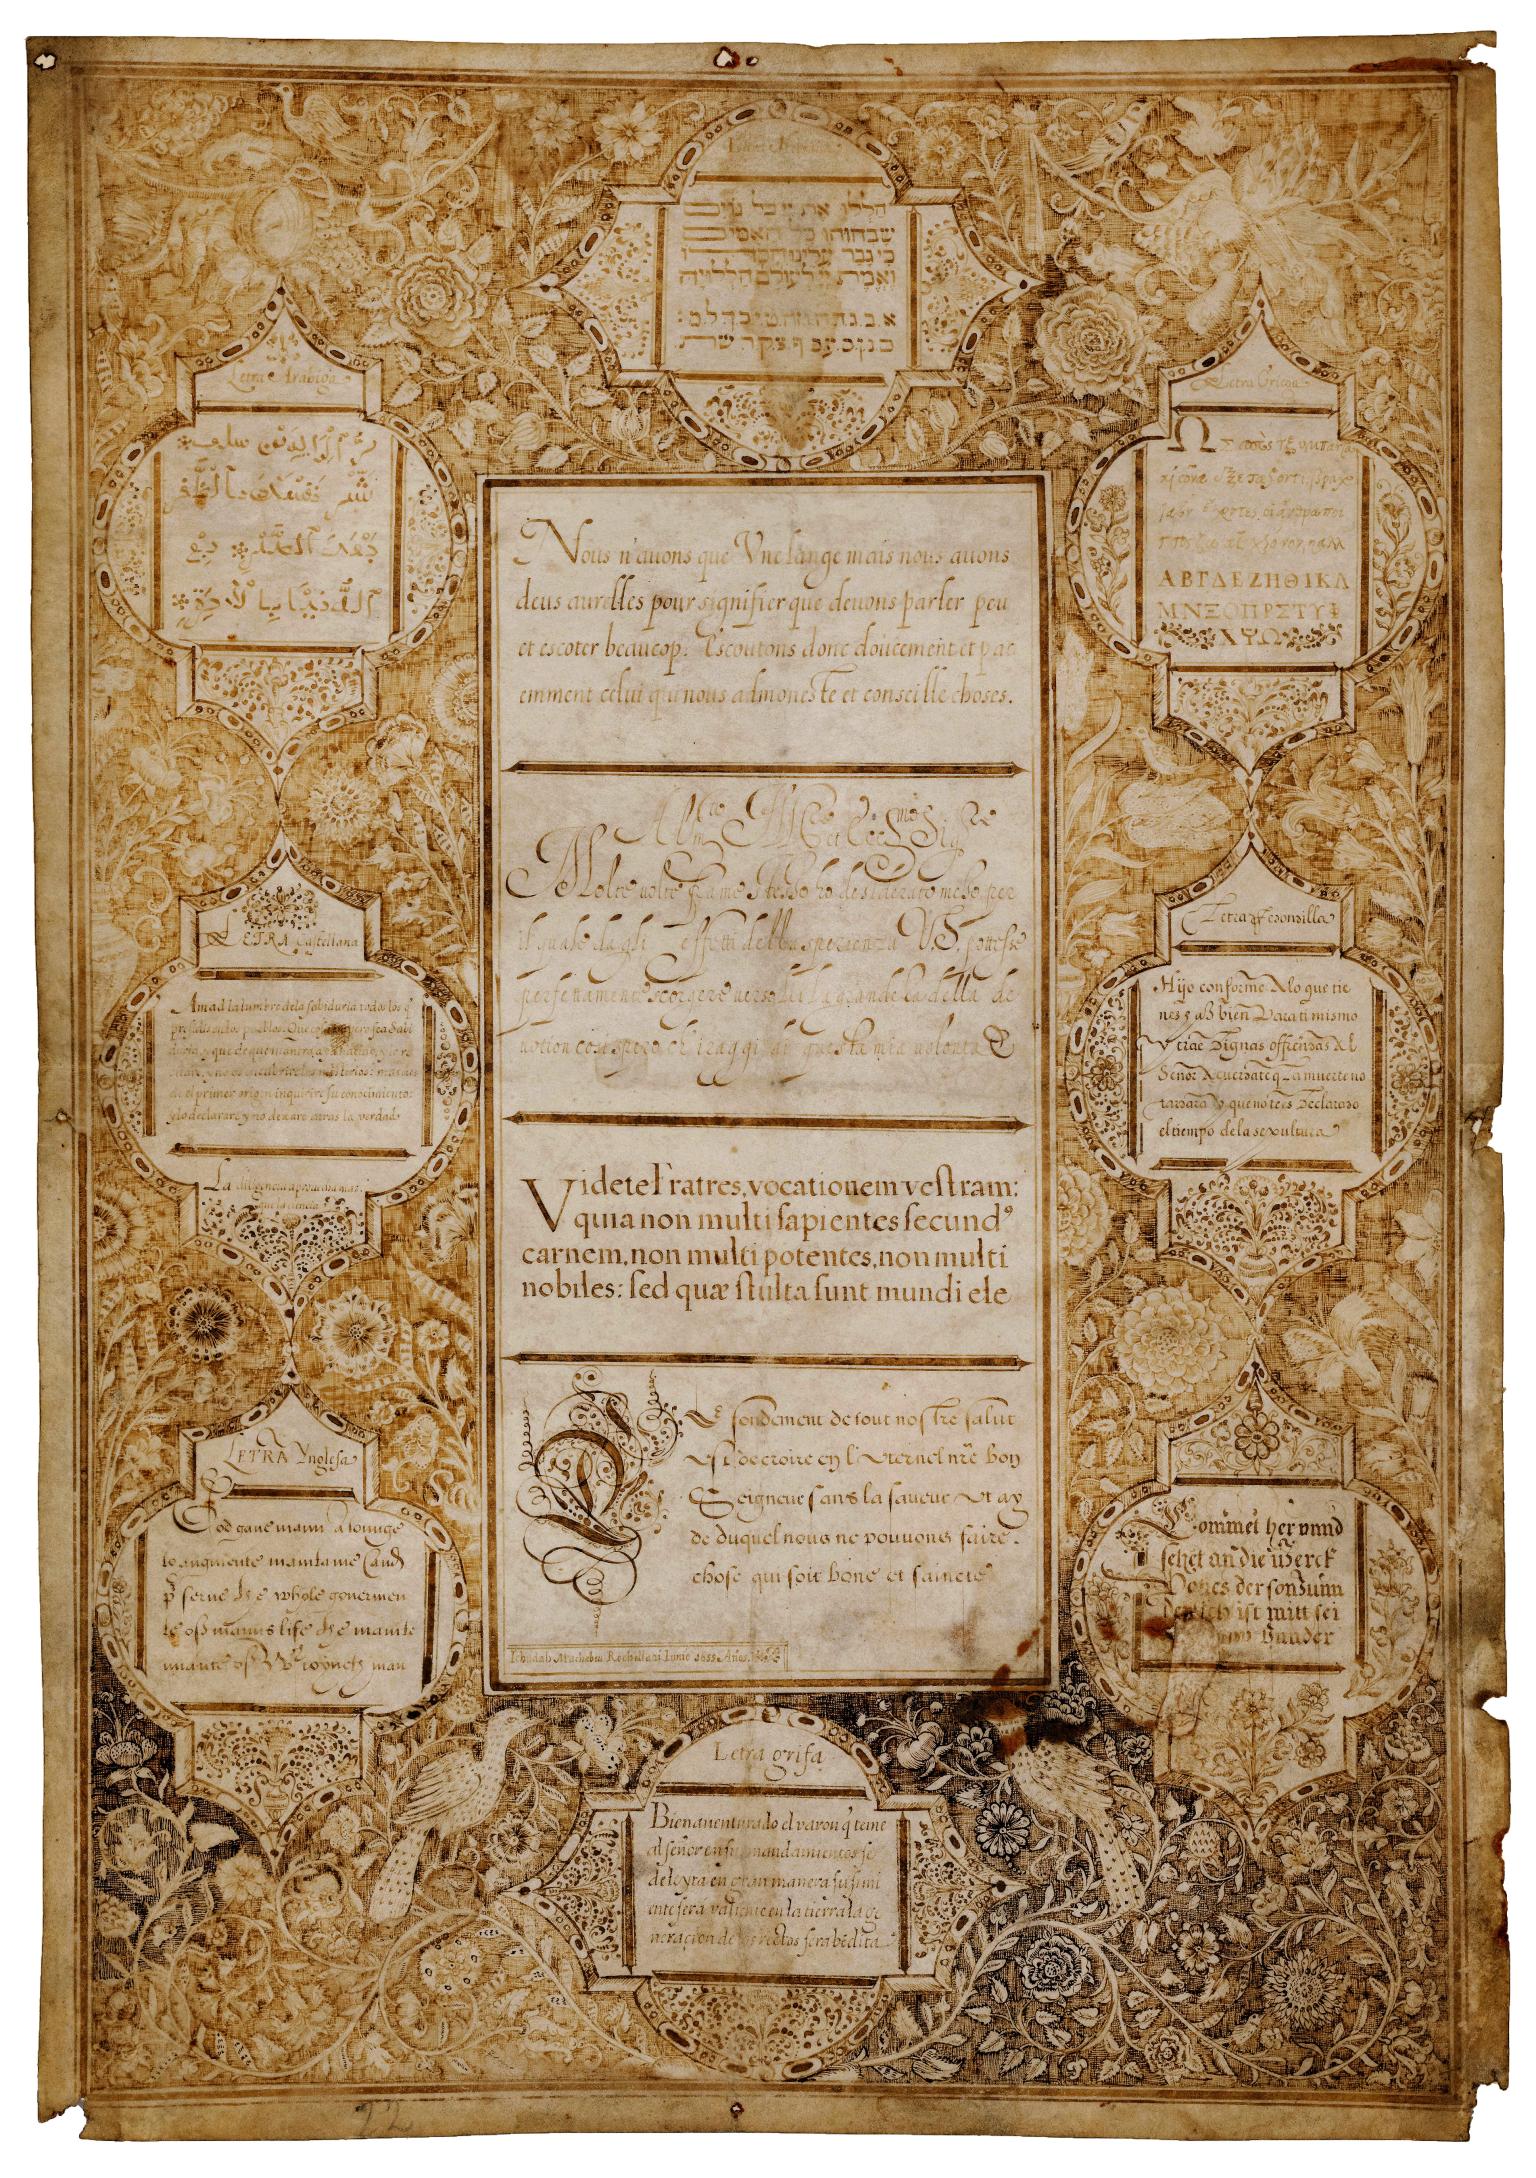 Decorative page of birds, flowers, and rectangular sections of different scripts. 